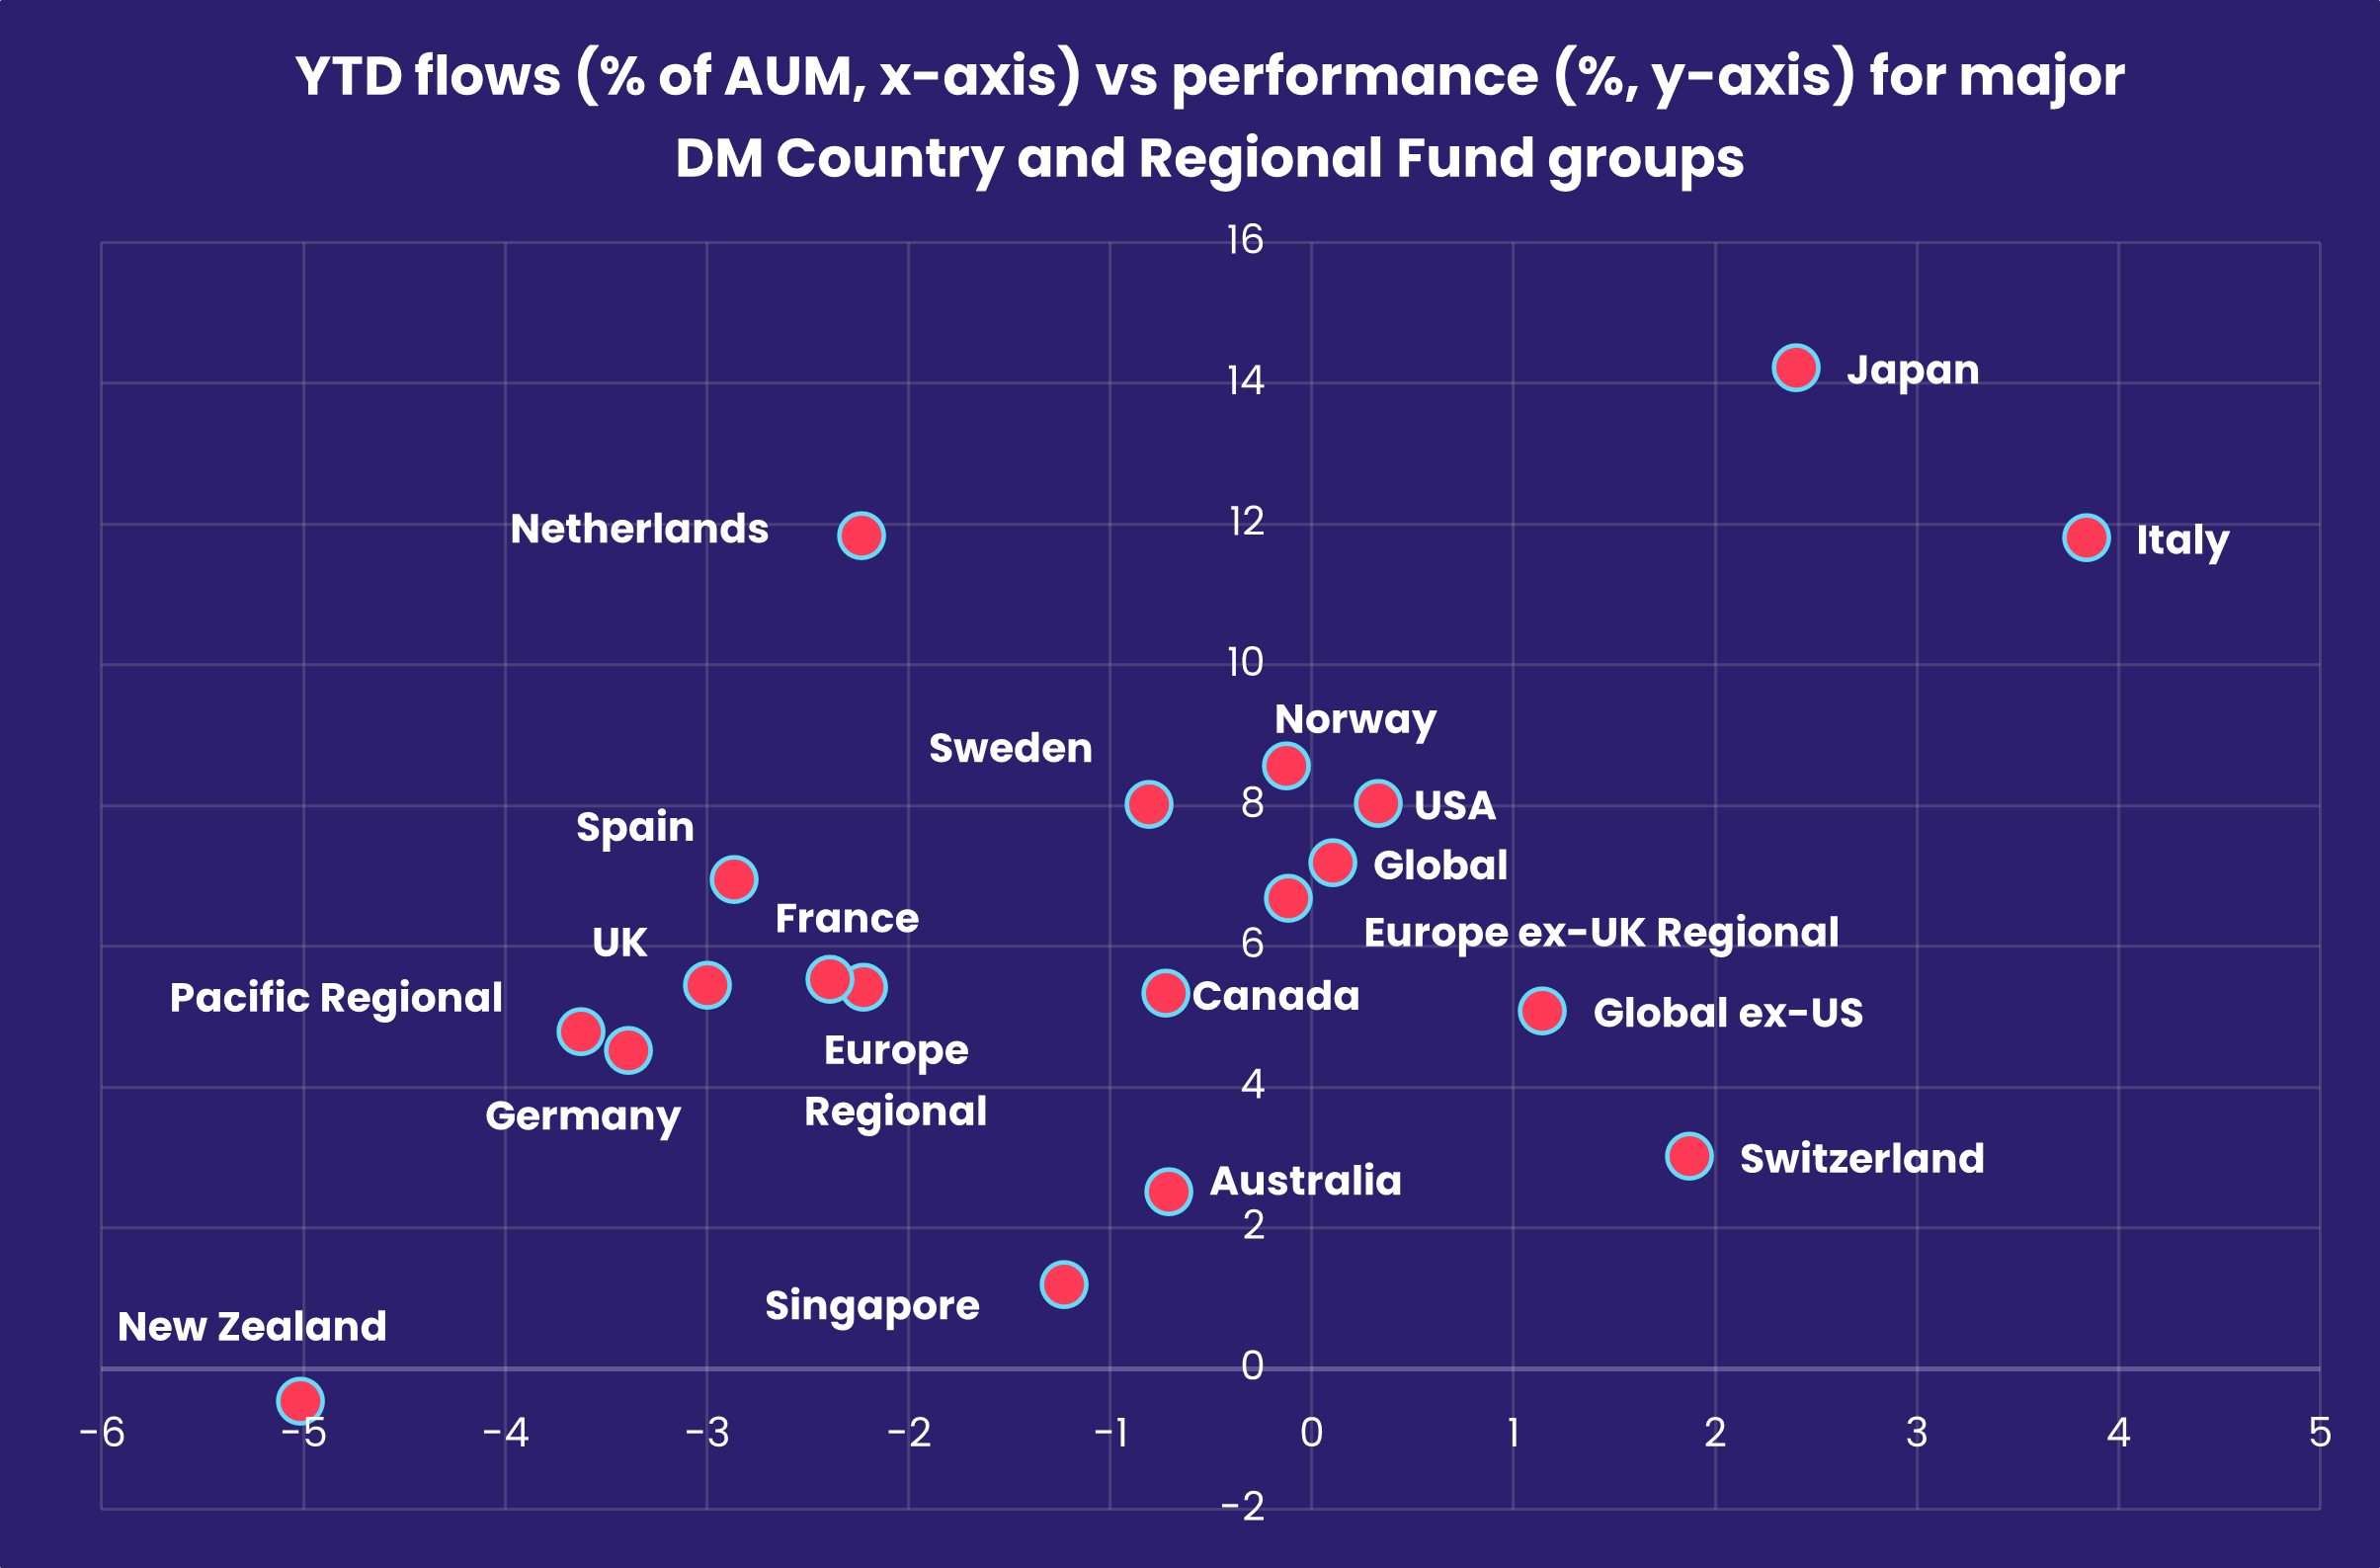 Chart representing 'YTD flows (% of AUM, x-axis) vs performance (%, y-axis) for major DM Country and Regional Fund groups'